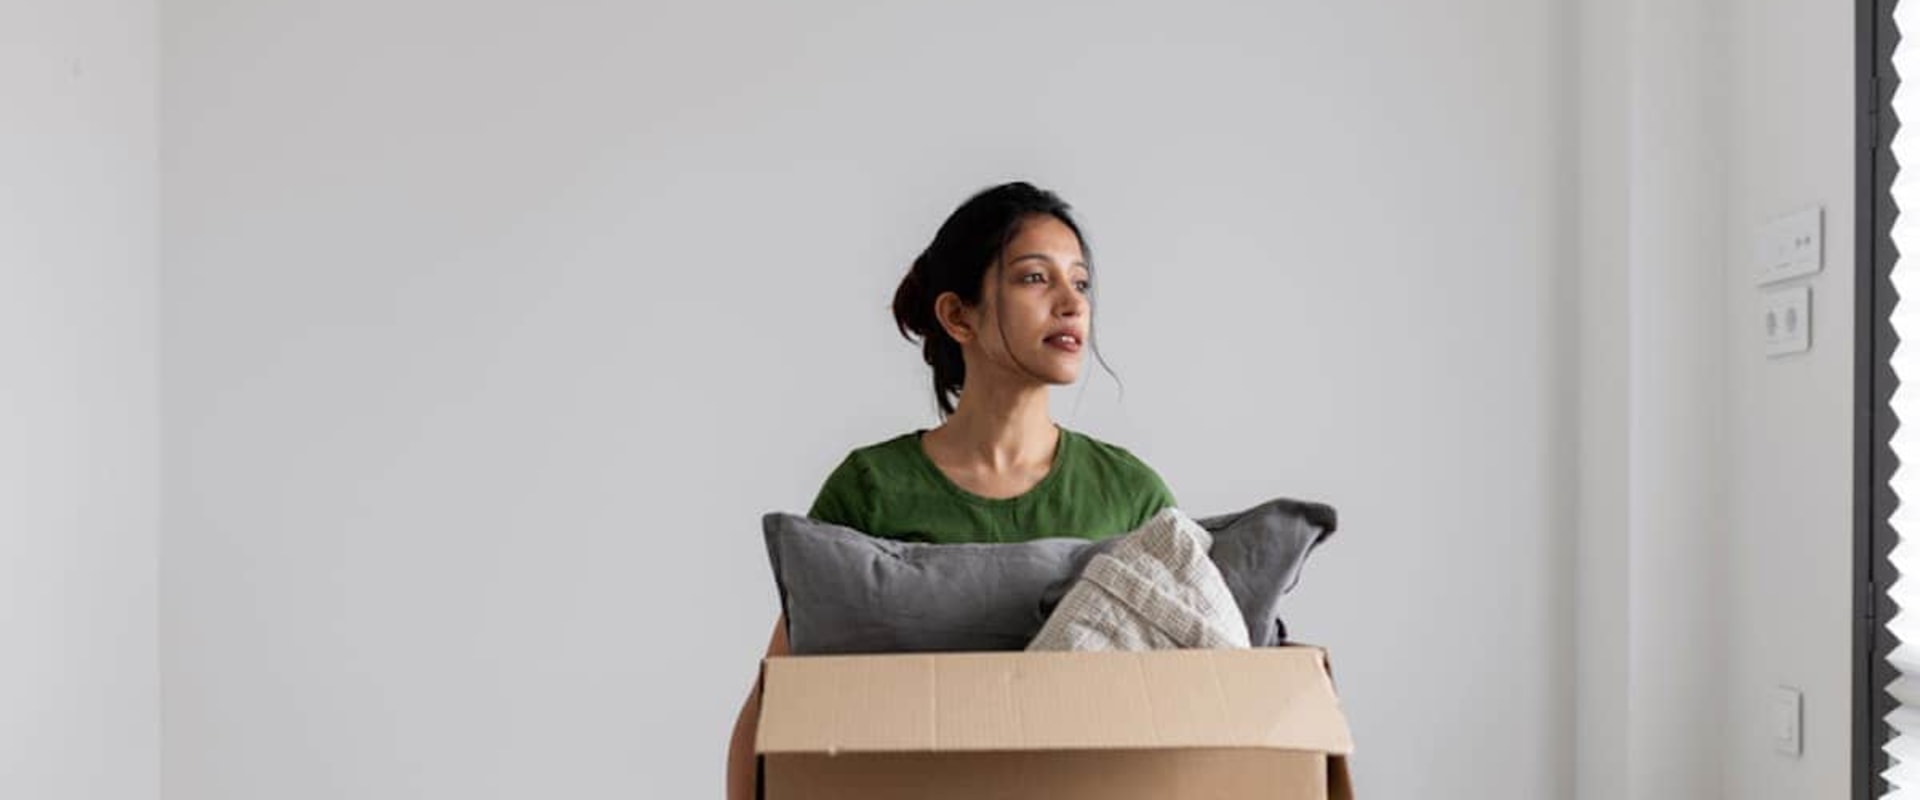 What is considered a qualified moving expense?